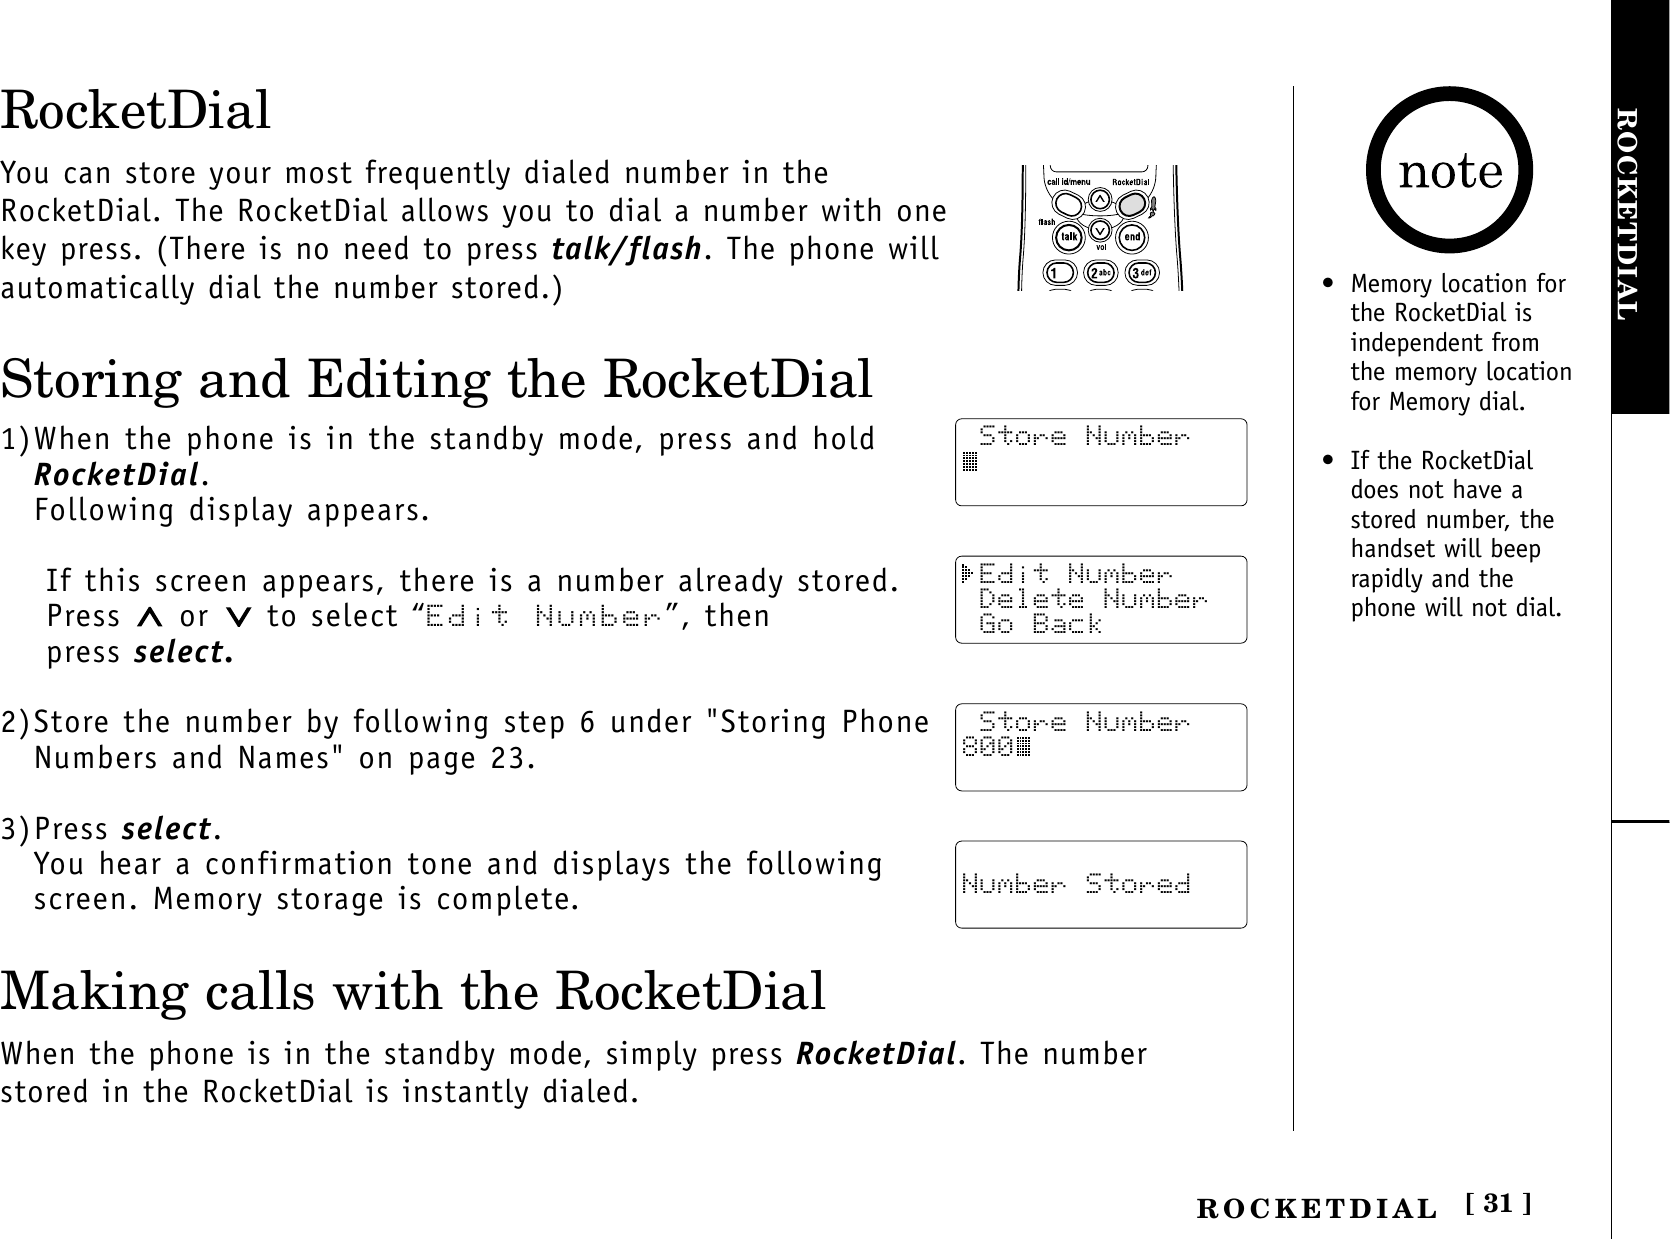 [ 31 ]ROCKETDIALROCKETDIALRocketDialYou can store your most frequently dialed number in theRocketDial. The RocketDial allows you to dial a number with onekey press. (There is no need to press talk/flash. The phone willautomatically dial the number stored.)Storing and Editing the RocketDial1)When the phone is in the standby mode, press and hold RocketDial.Following display appears.If this screen appears, there is a number already stored.Press  or  to select “Edit Number”, then press select.2)Store the number by following step 6 under &quot;Storing PhoneNumbers and Names&quot; on page 23.3)Press select.You hear a confirmation tone and displays the followingscreen. Memory storage is complete.Making calls with the RocketDialWhen the phone is in the standby mode, simply press RocketDial. The numberstored in the RocketDial is instantly dialed. Store Number Edit Number Delete Number Go Back Number Stored Store Number800• Memory location for the RocketDial isindependent fromthe memory locationfor Memory dial.• If the RocketDialdoes not have astored number, thehandset will beeprapidly and thephone will not dial.